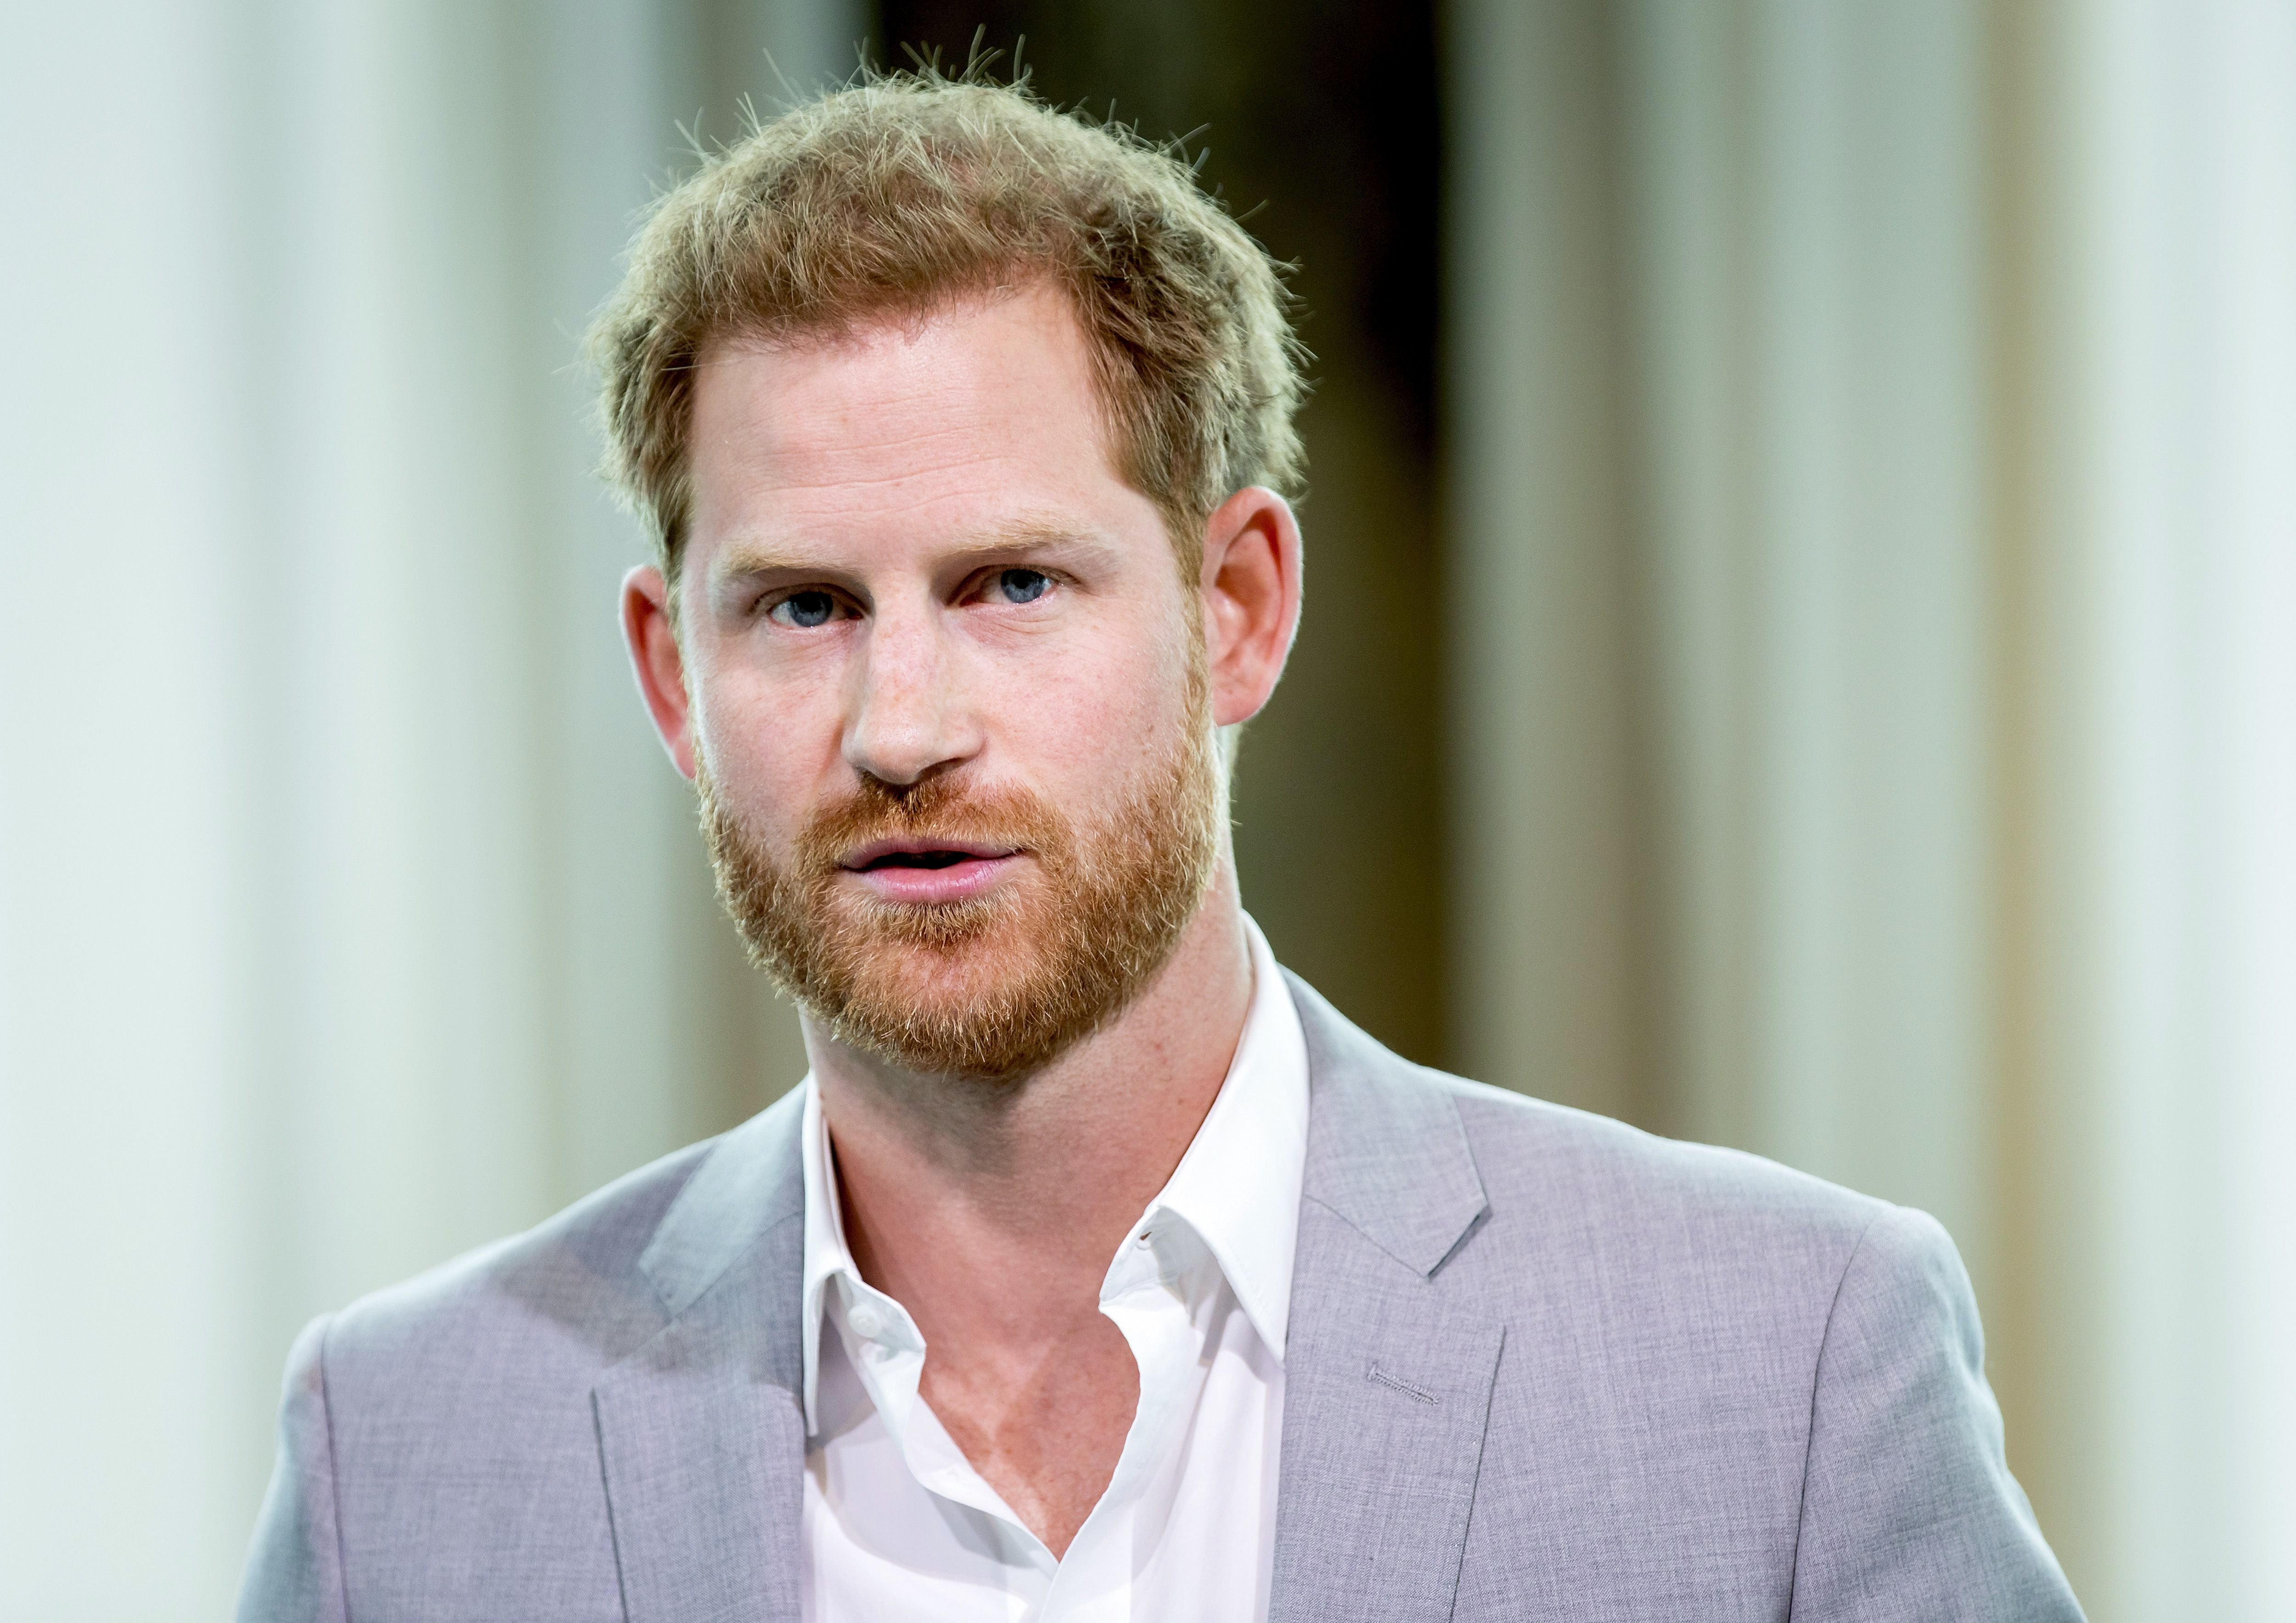 Prince Harry attending the Adam Tower project introduction and global partnership on September 3, 2019 in Amsterdam. | Source: Getty Images